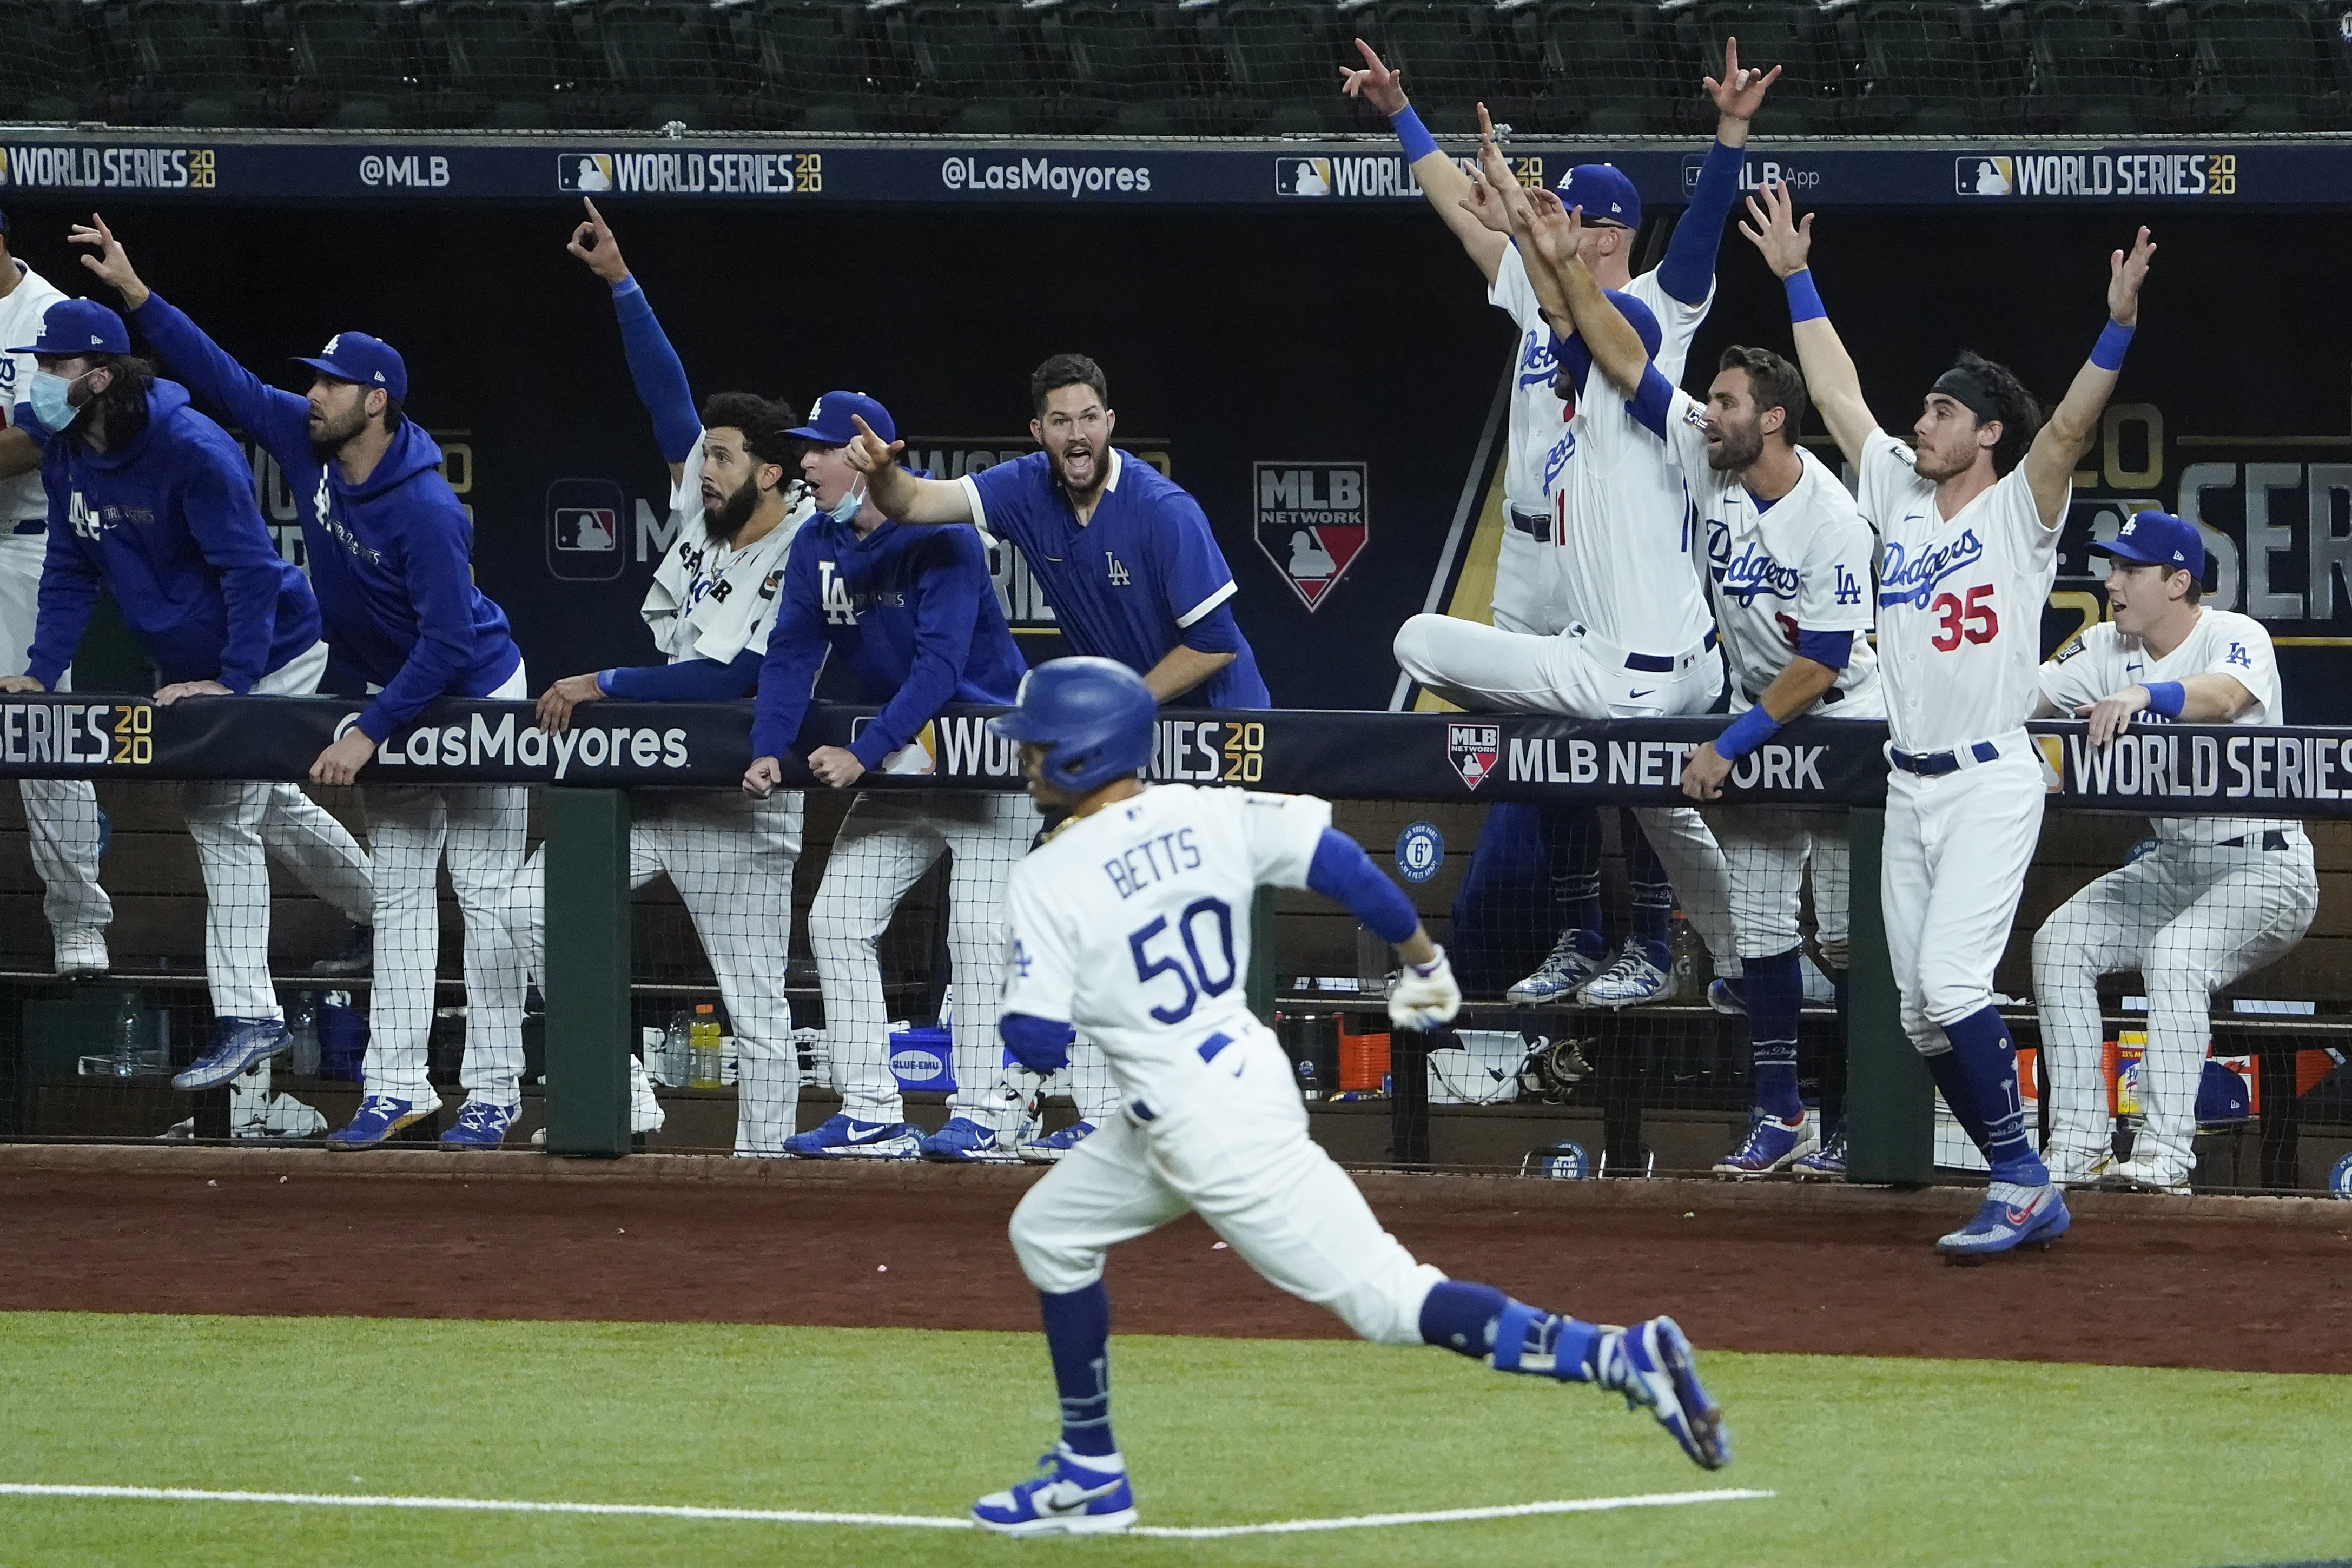 No asterisk needed: Revamped playoff format legitimizes shortened season as Dodgers  win first championship since 1988